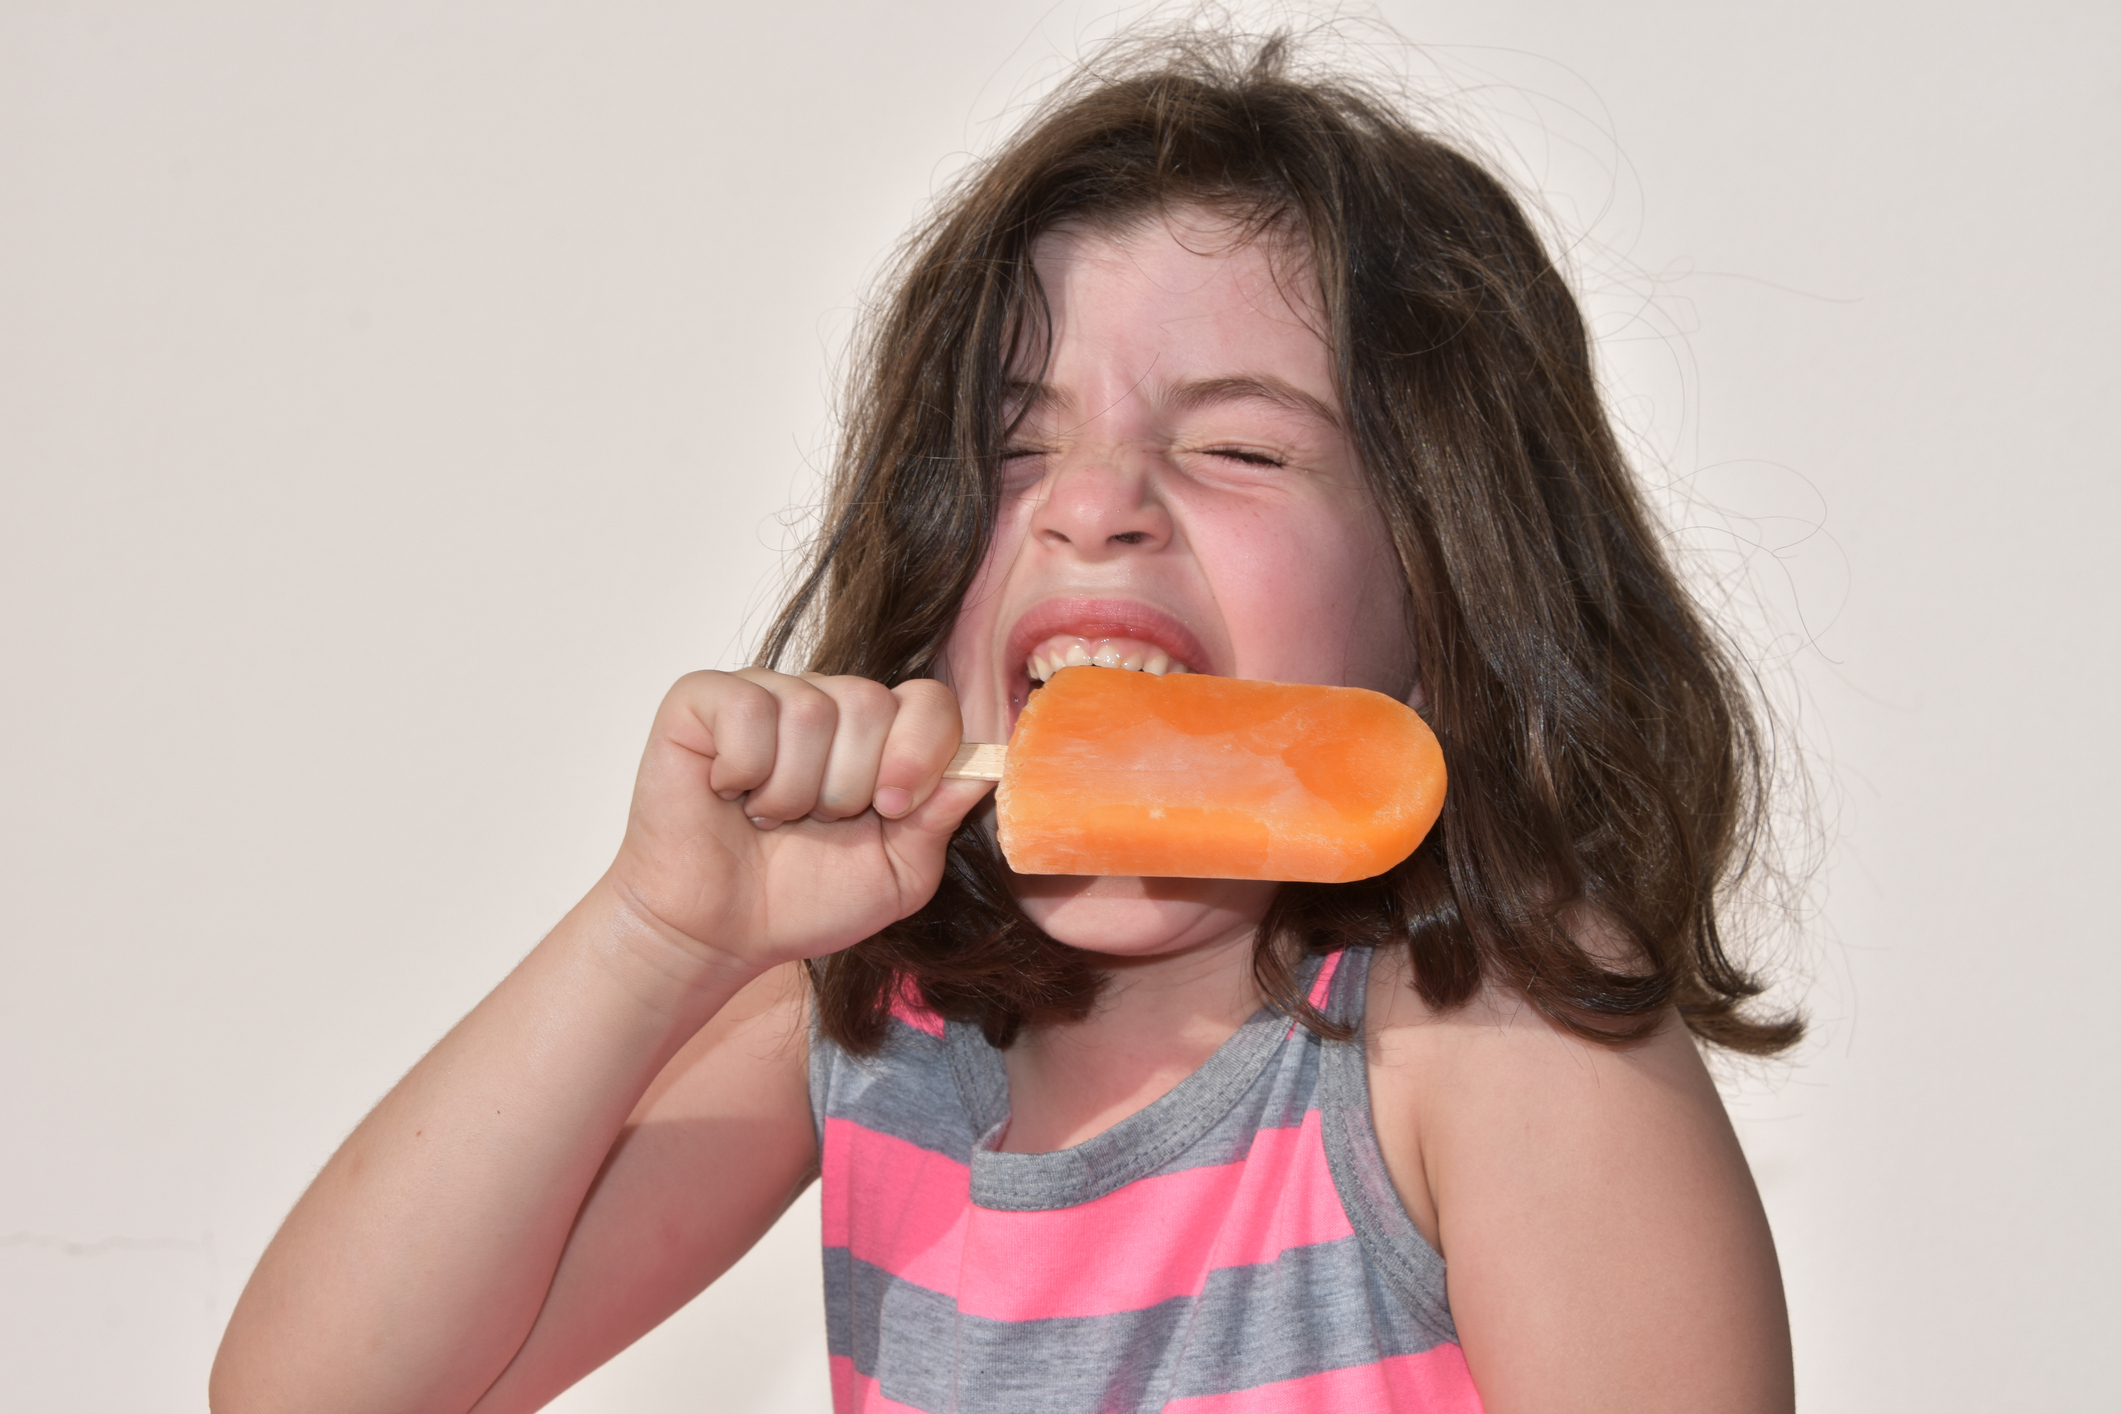 Child bites into a popsicle with a grimace, indicating it may be cold or sour